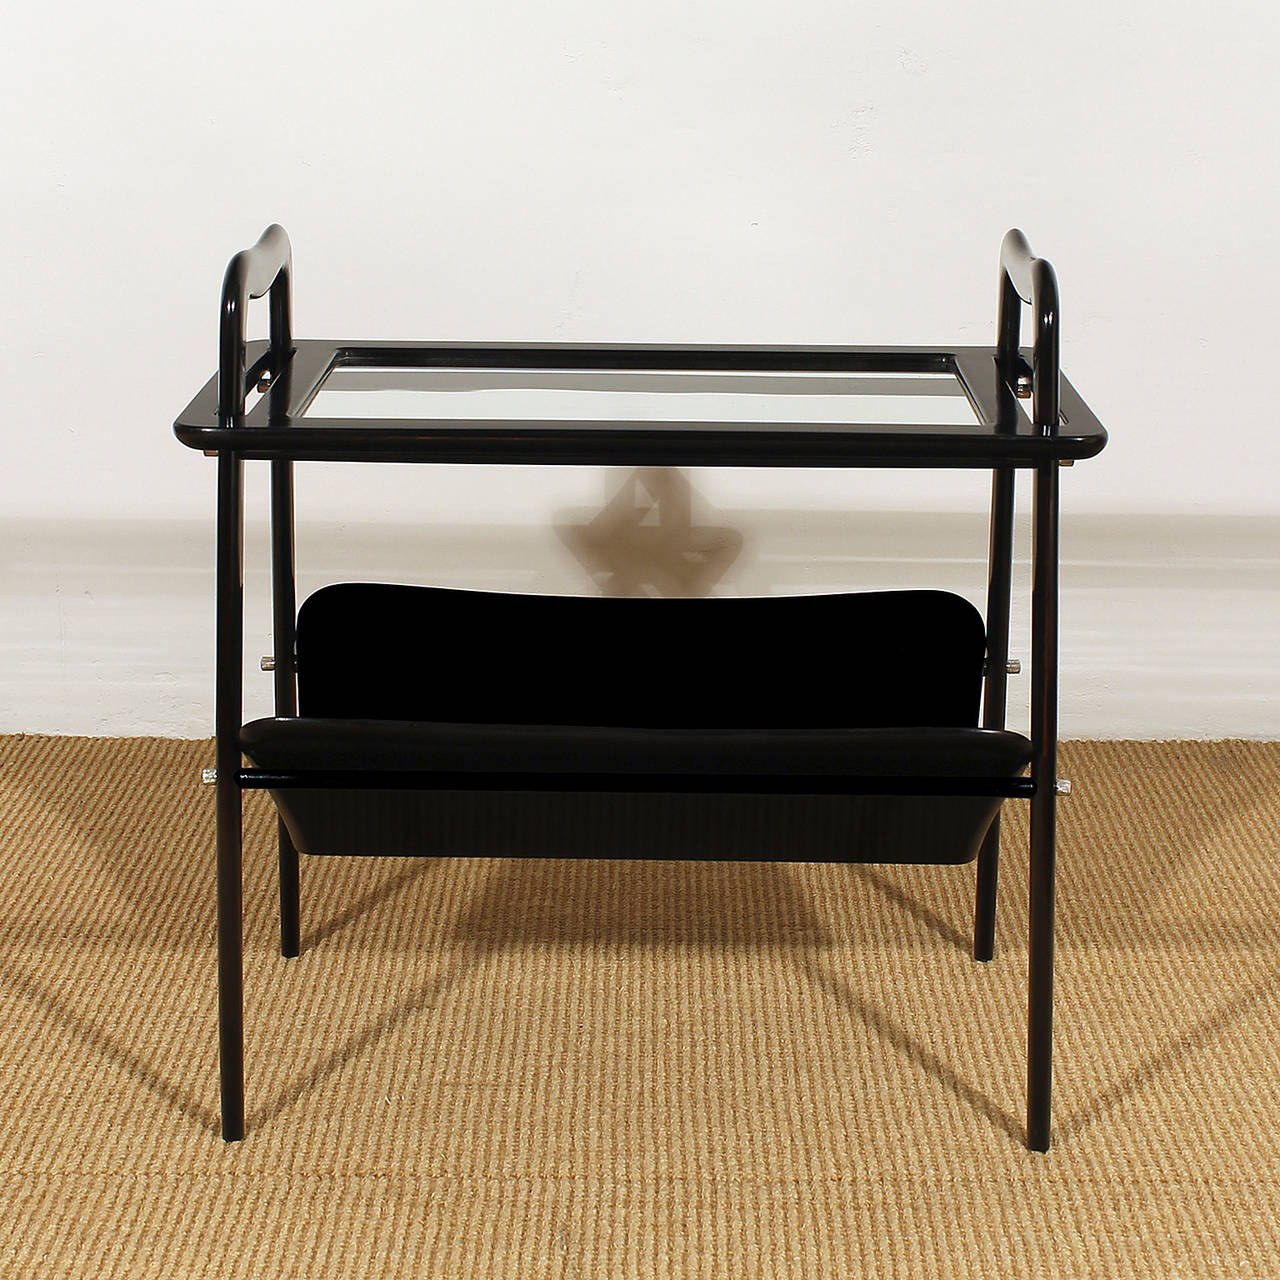 Small sidetable and magazine rack, removable tray on top, french polished and stained beech wood, polished brass hardware.

Design: Ico Parisi 

Italy c. 1950